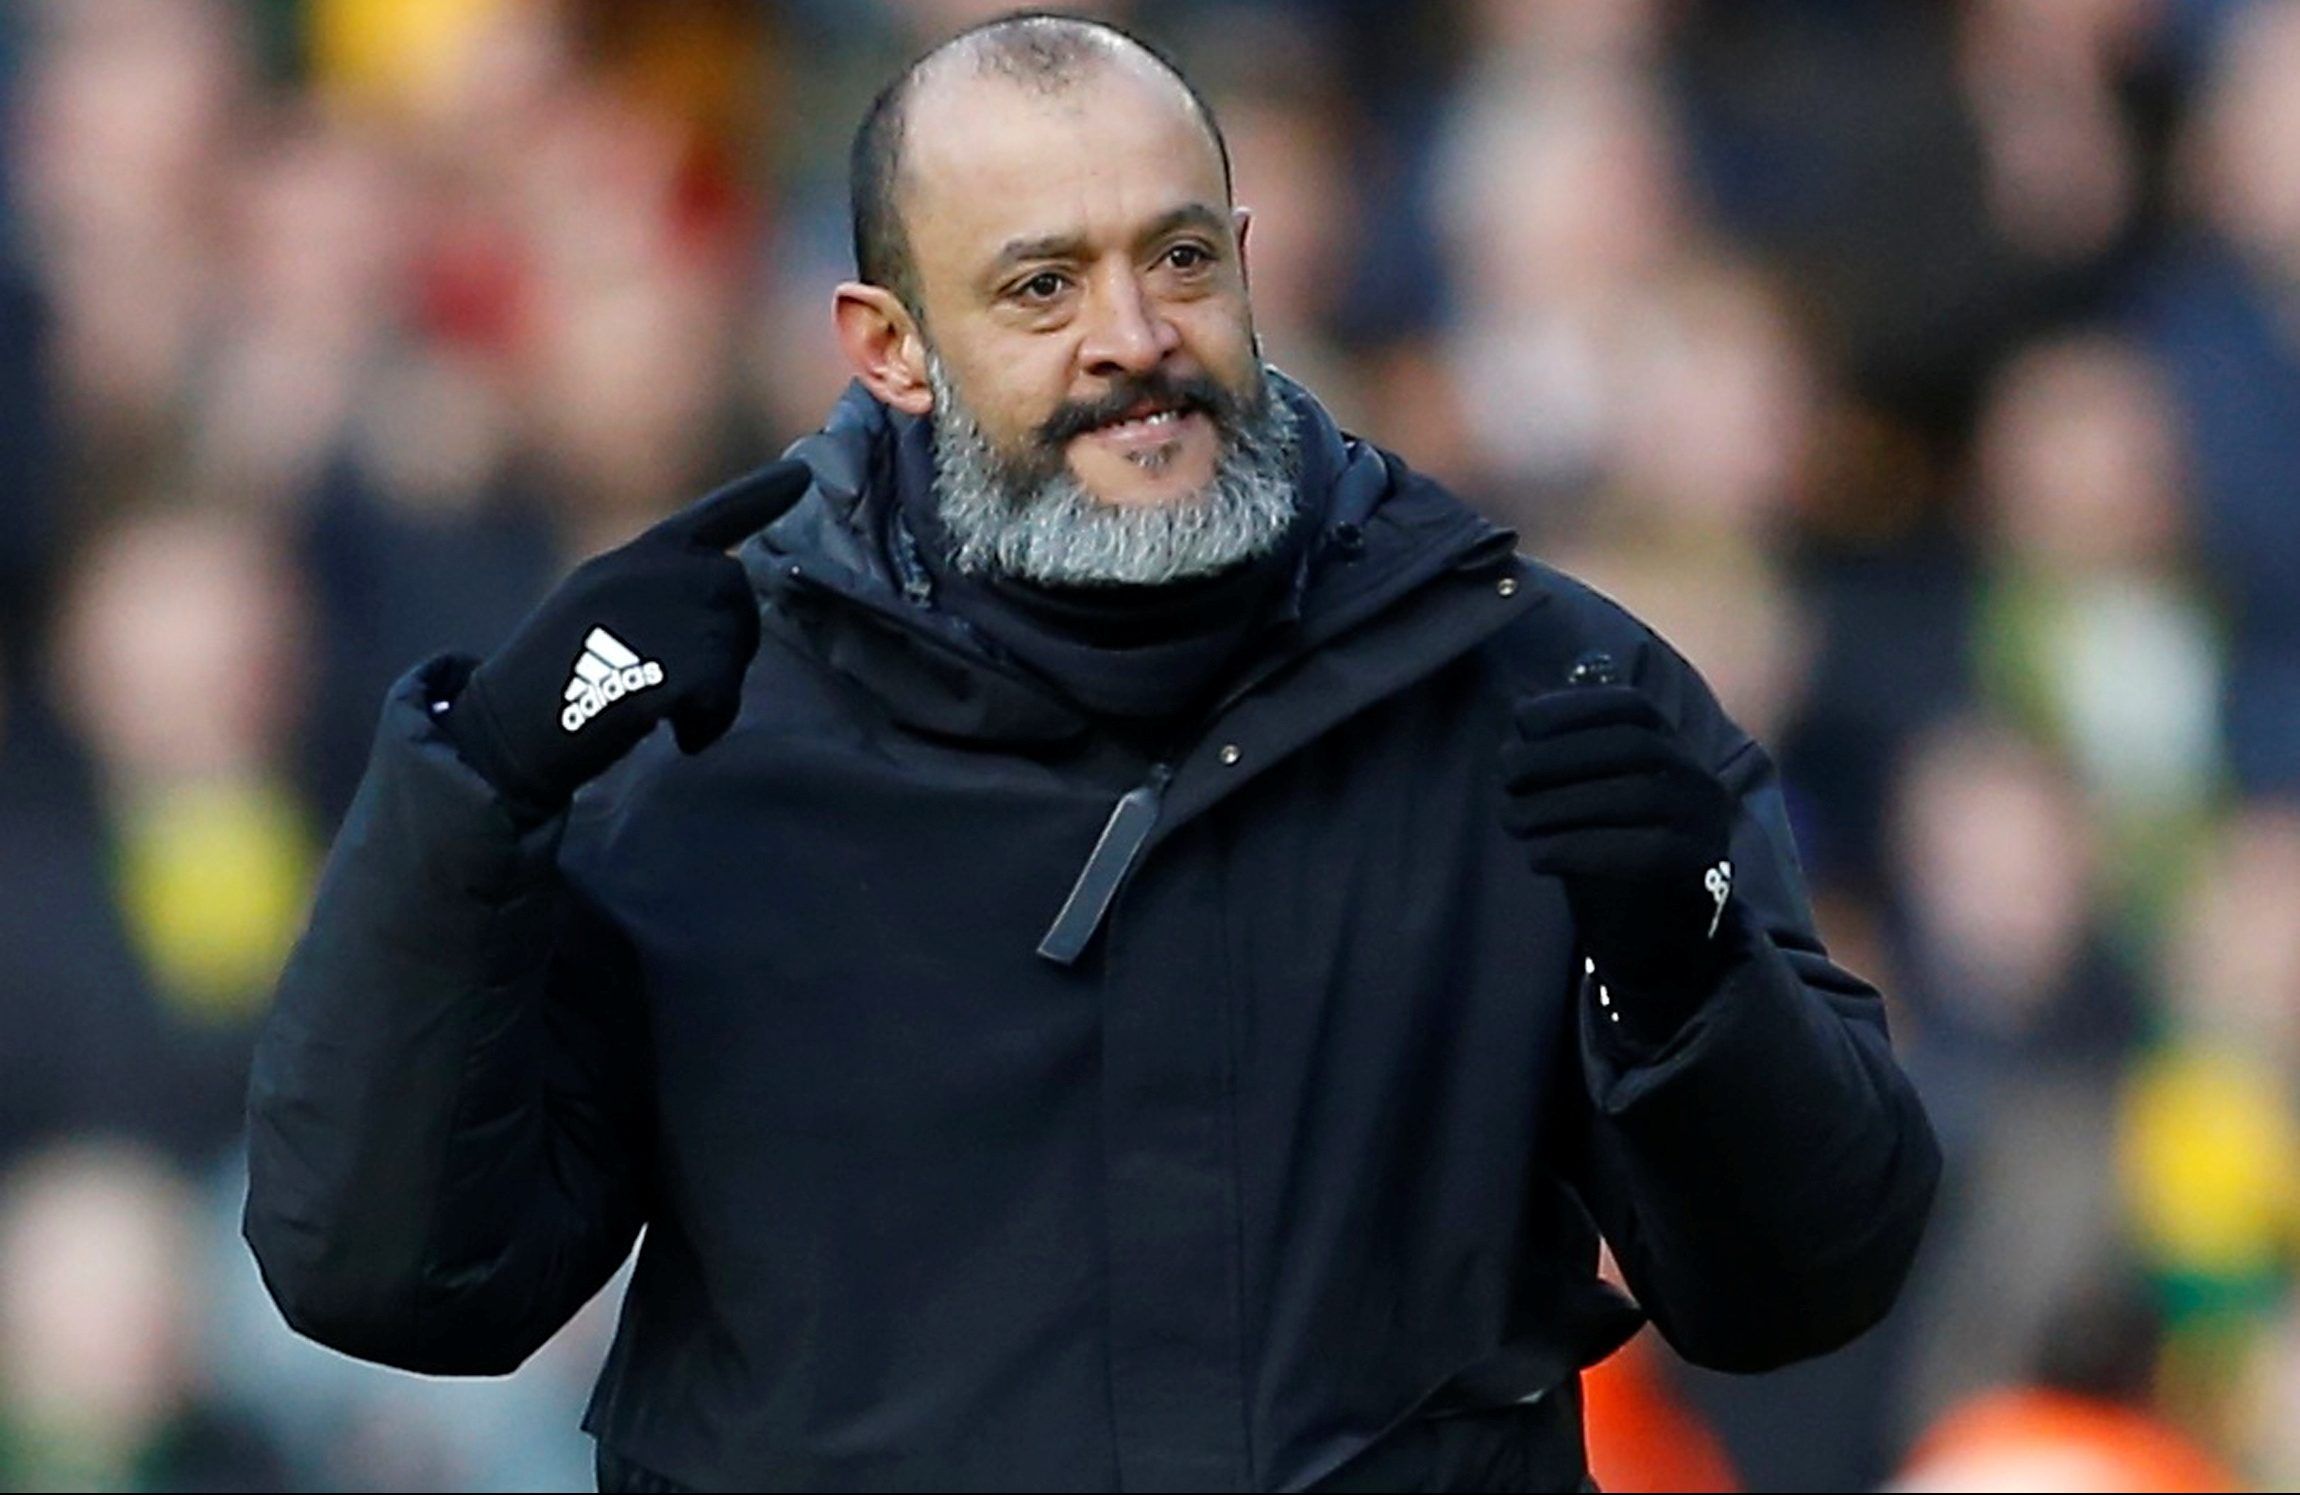 Soccer Football - Premier League - Wolverhampton Wanderers v Norwich City - Molineux Stadium, Wolverhampton, Britain - February 23, 2020  Wolverhampton Wanderers manager Nuno Espirito Santo celebrates after the match   Action Images via Reuters/Craig Brough  EDITORIAL USE ONLY. No use with unauthorized audio, video, data, fixture lists, club/league logos or 